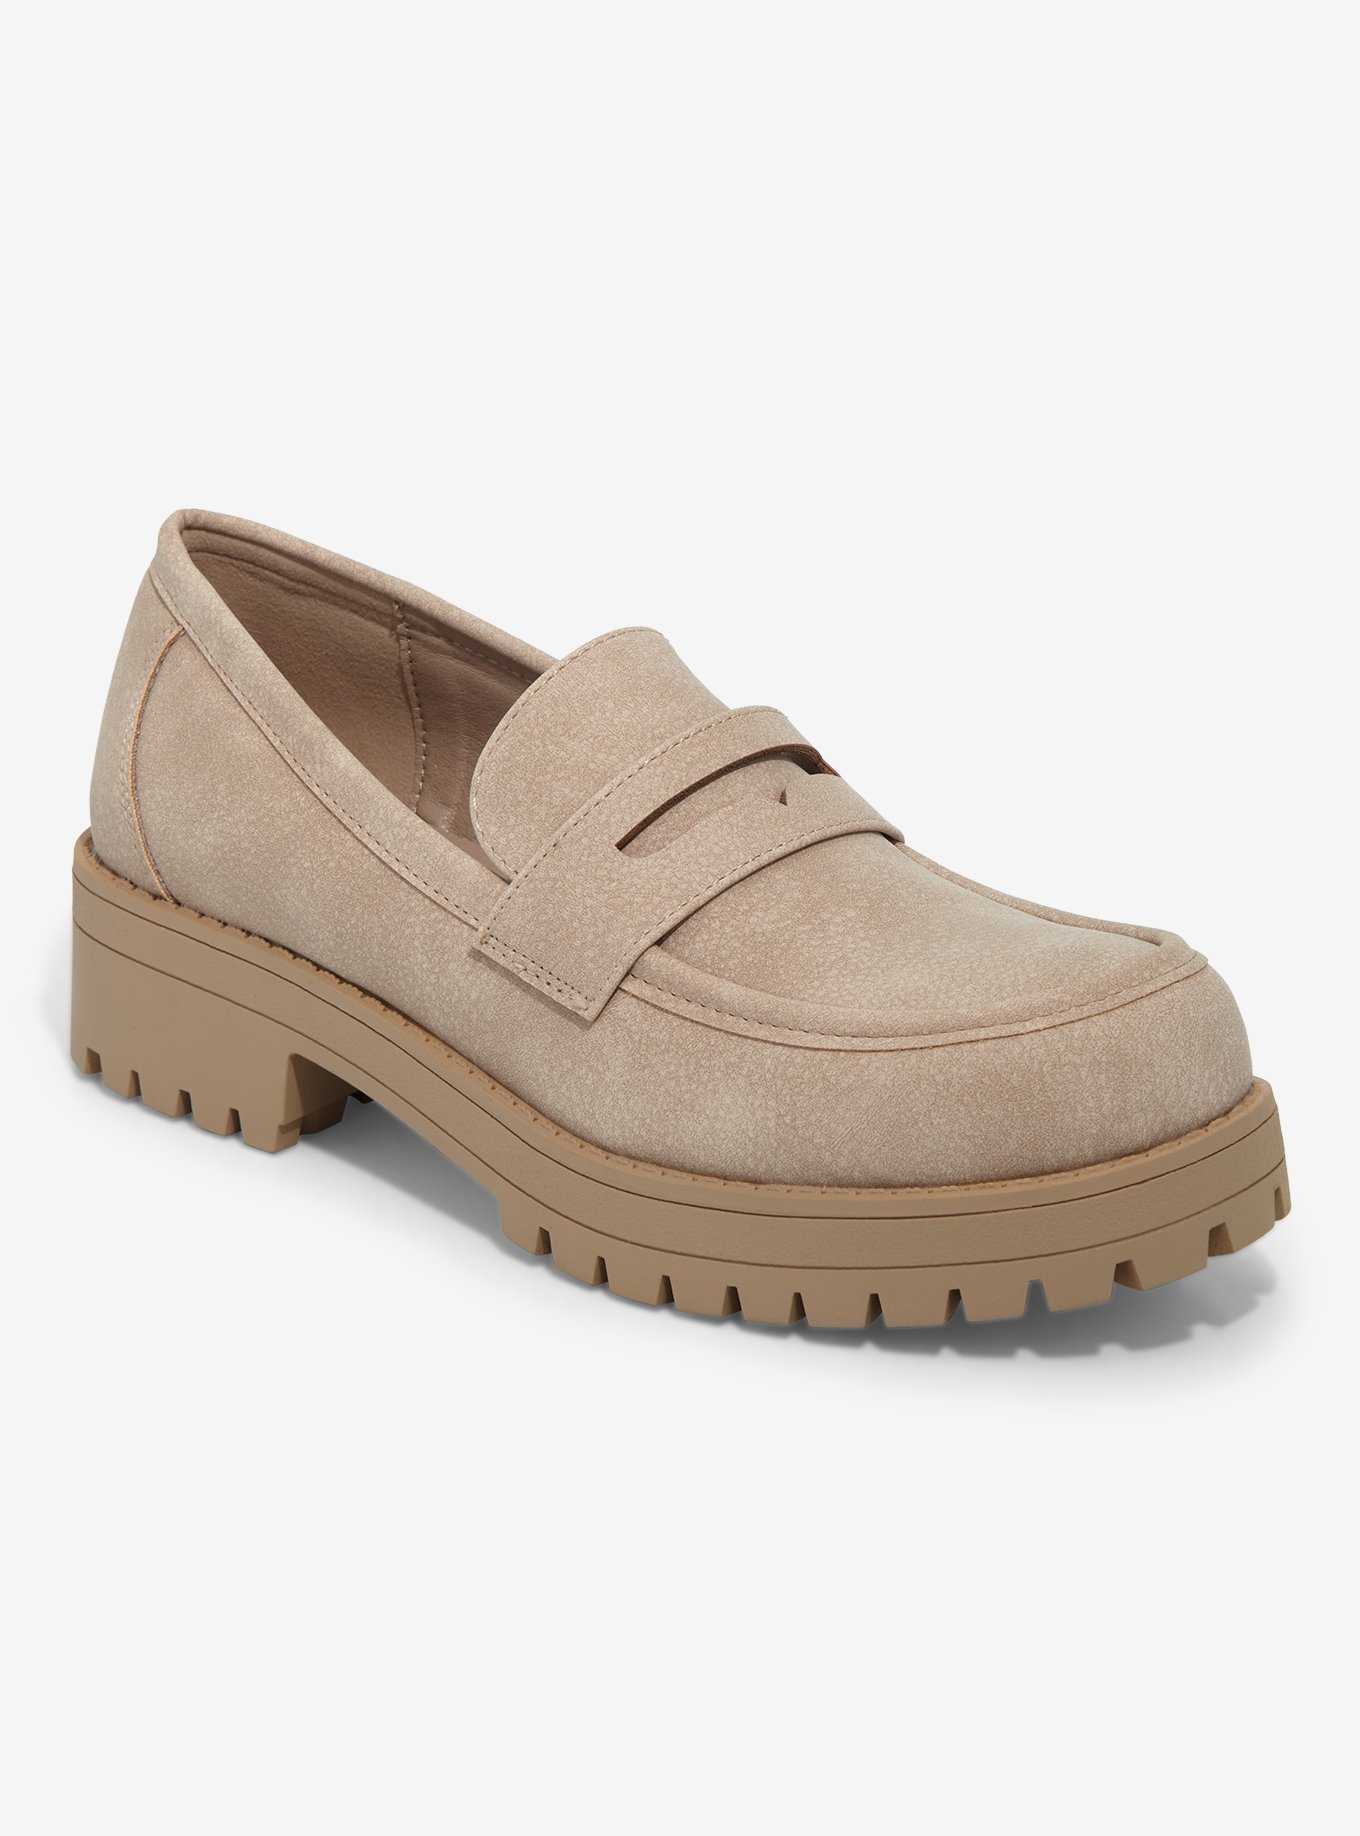 Dirty Laundry Tan Voidz Casual Loafers, , hi-res